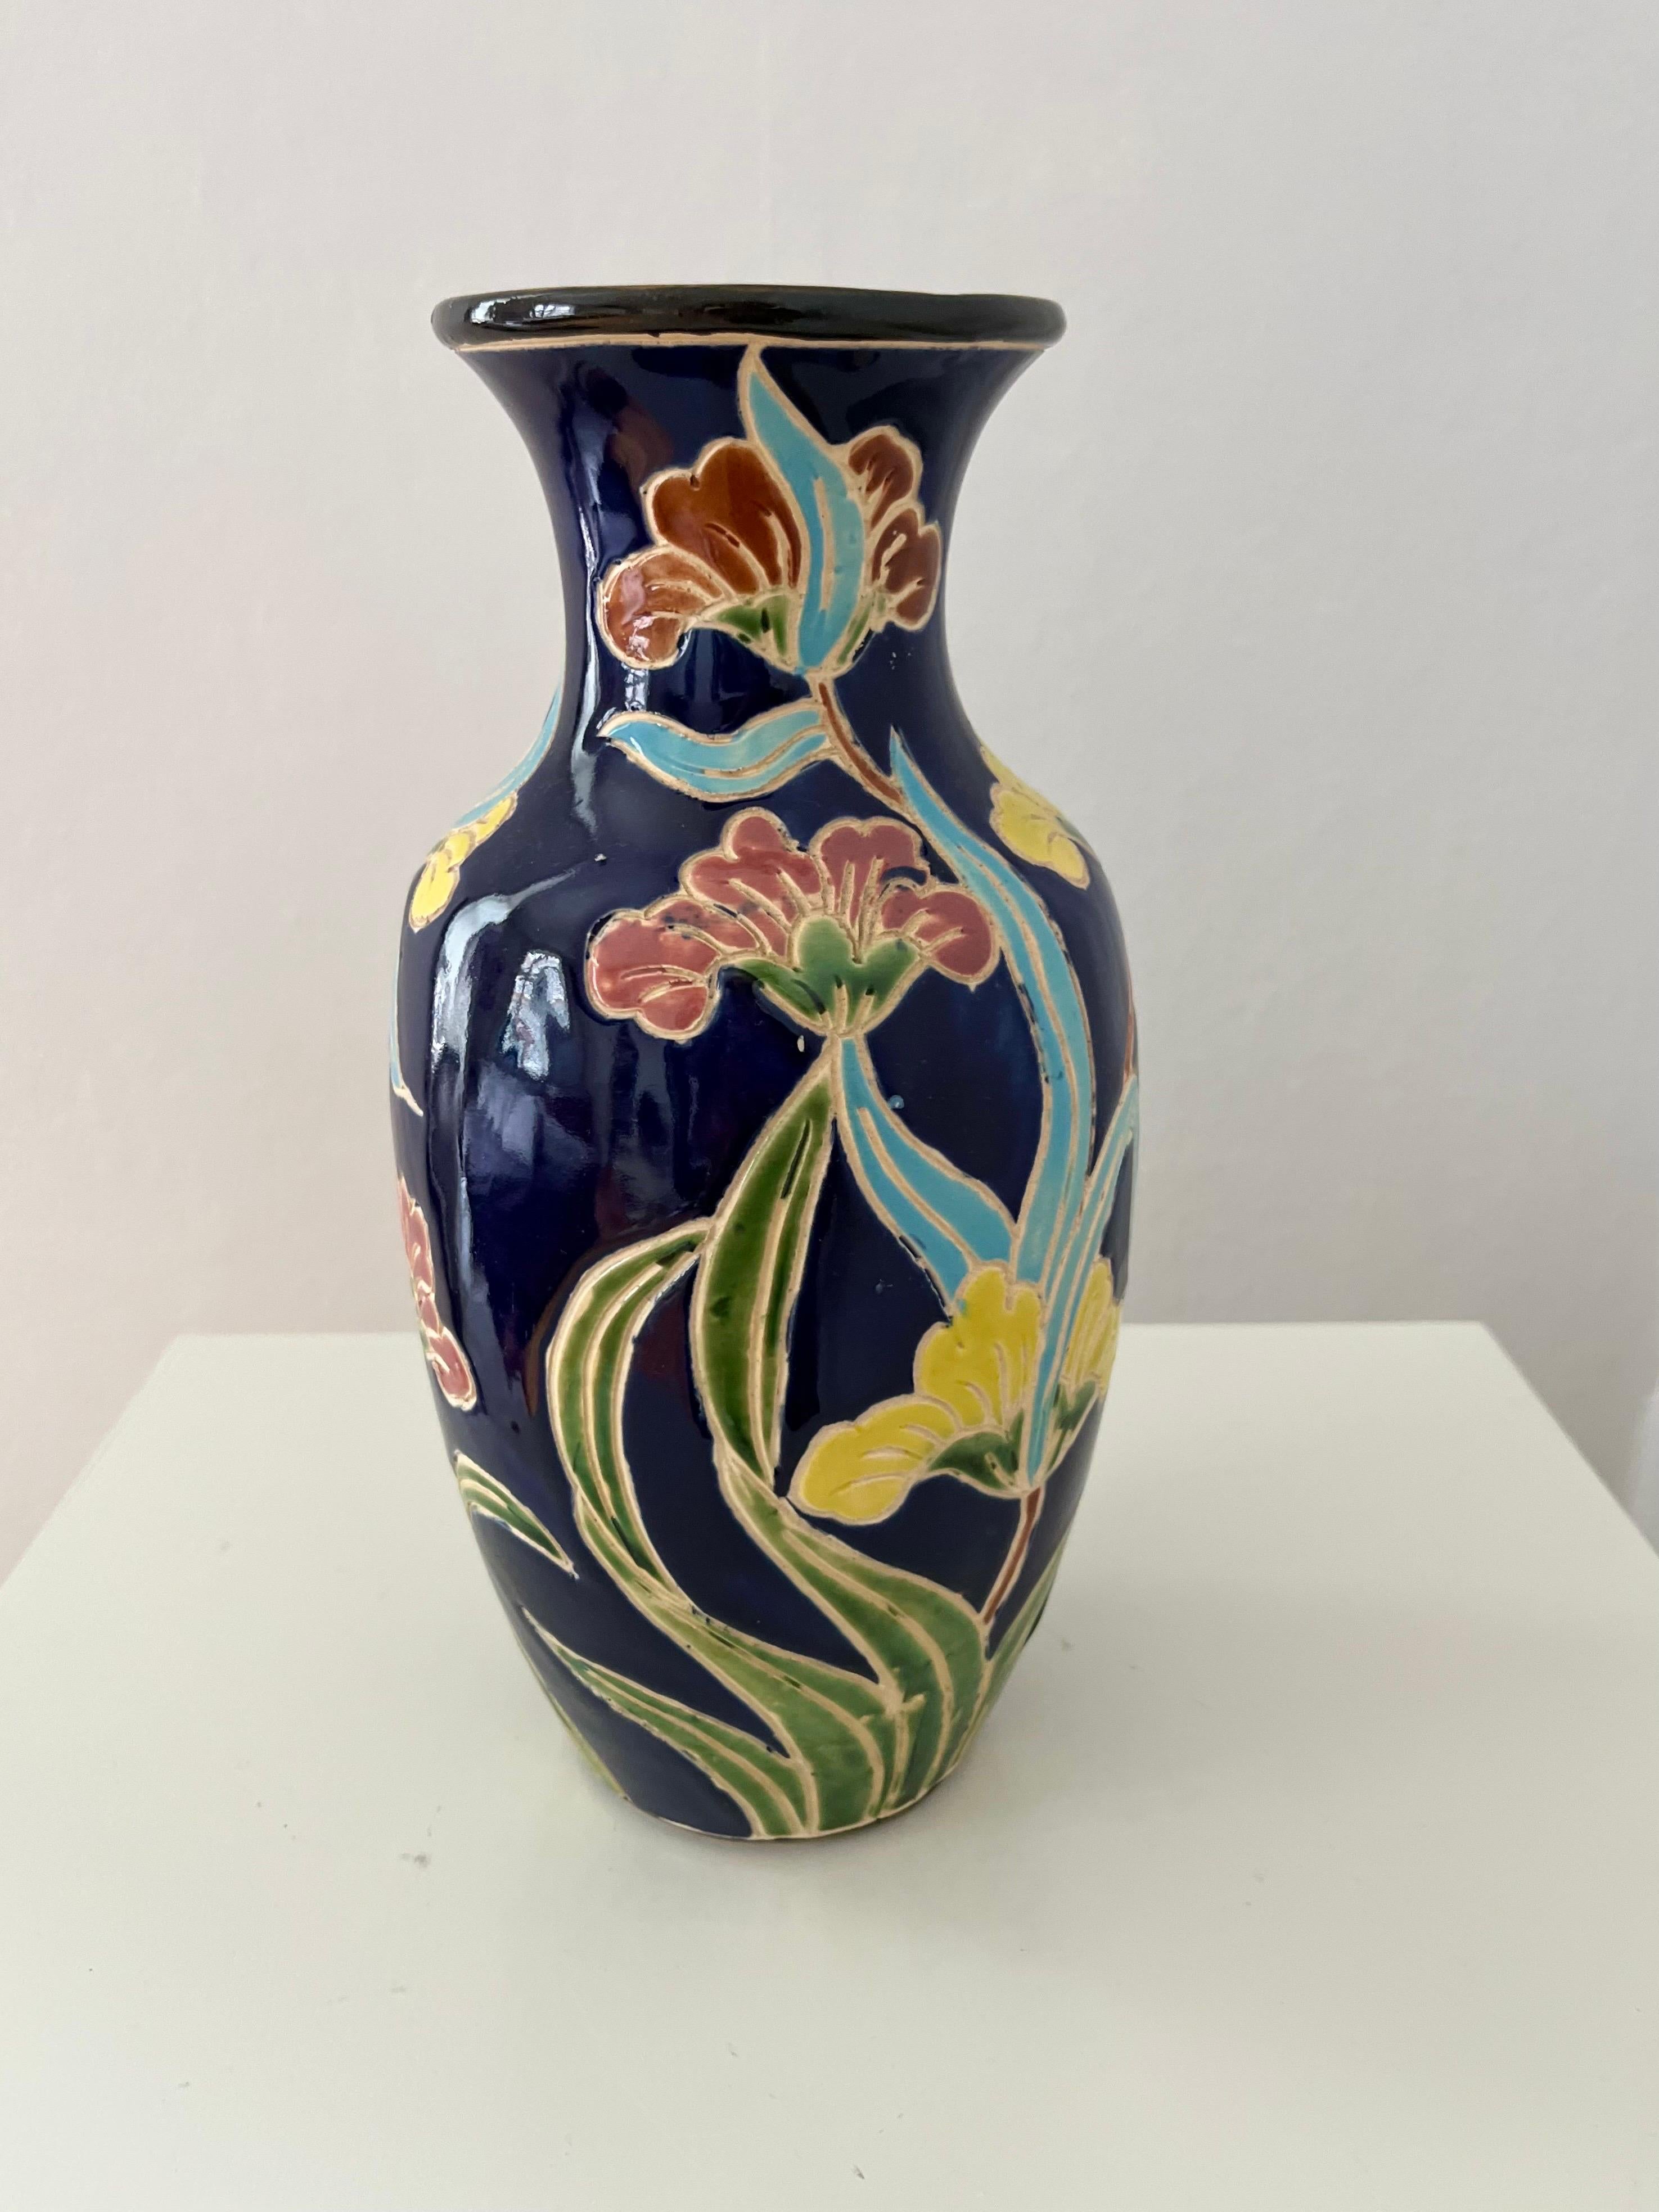 1960s/1970s Scandinavian Organic Modern Ceramic Vase with Colorful Floral Motifs

Stunning decorative ceramic vase from the 1960s/1970s. Adorned with intricate sgraffito/graved decorations featuring colorful floral motifs, this vase is a testament